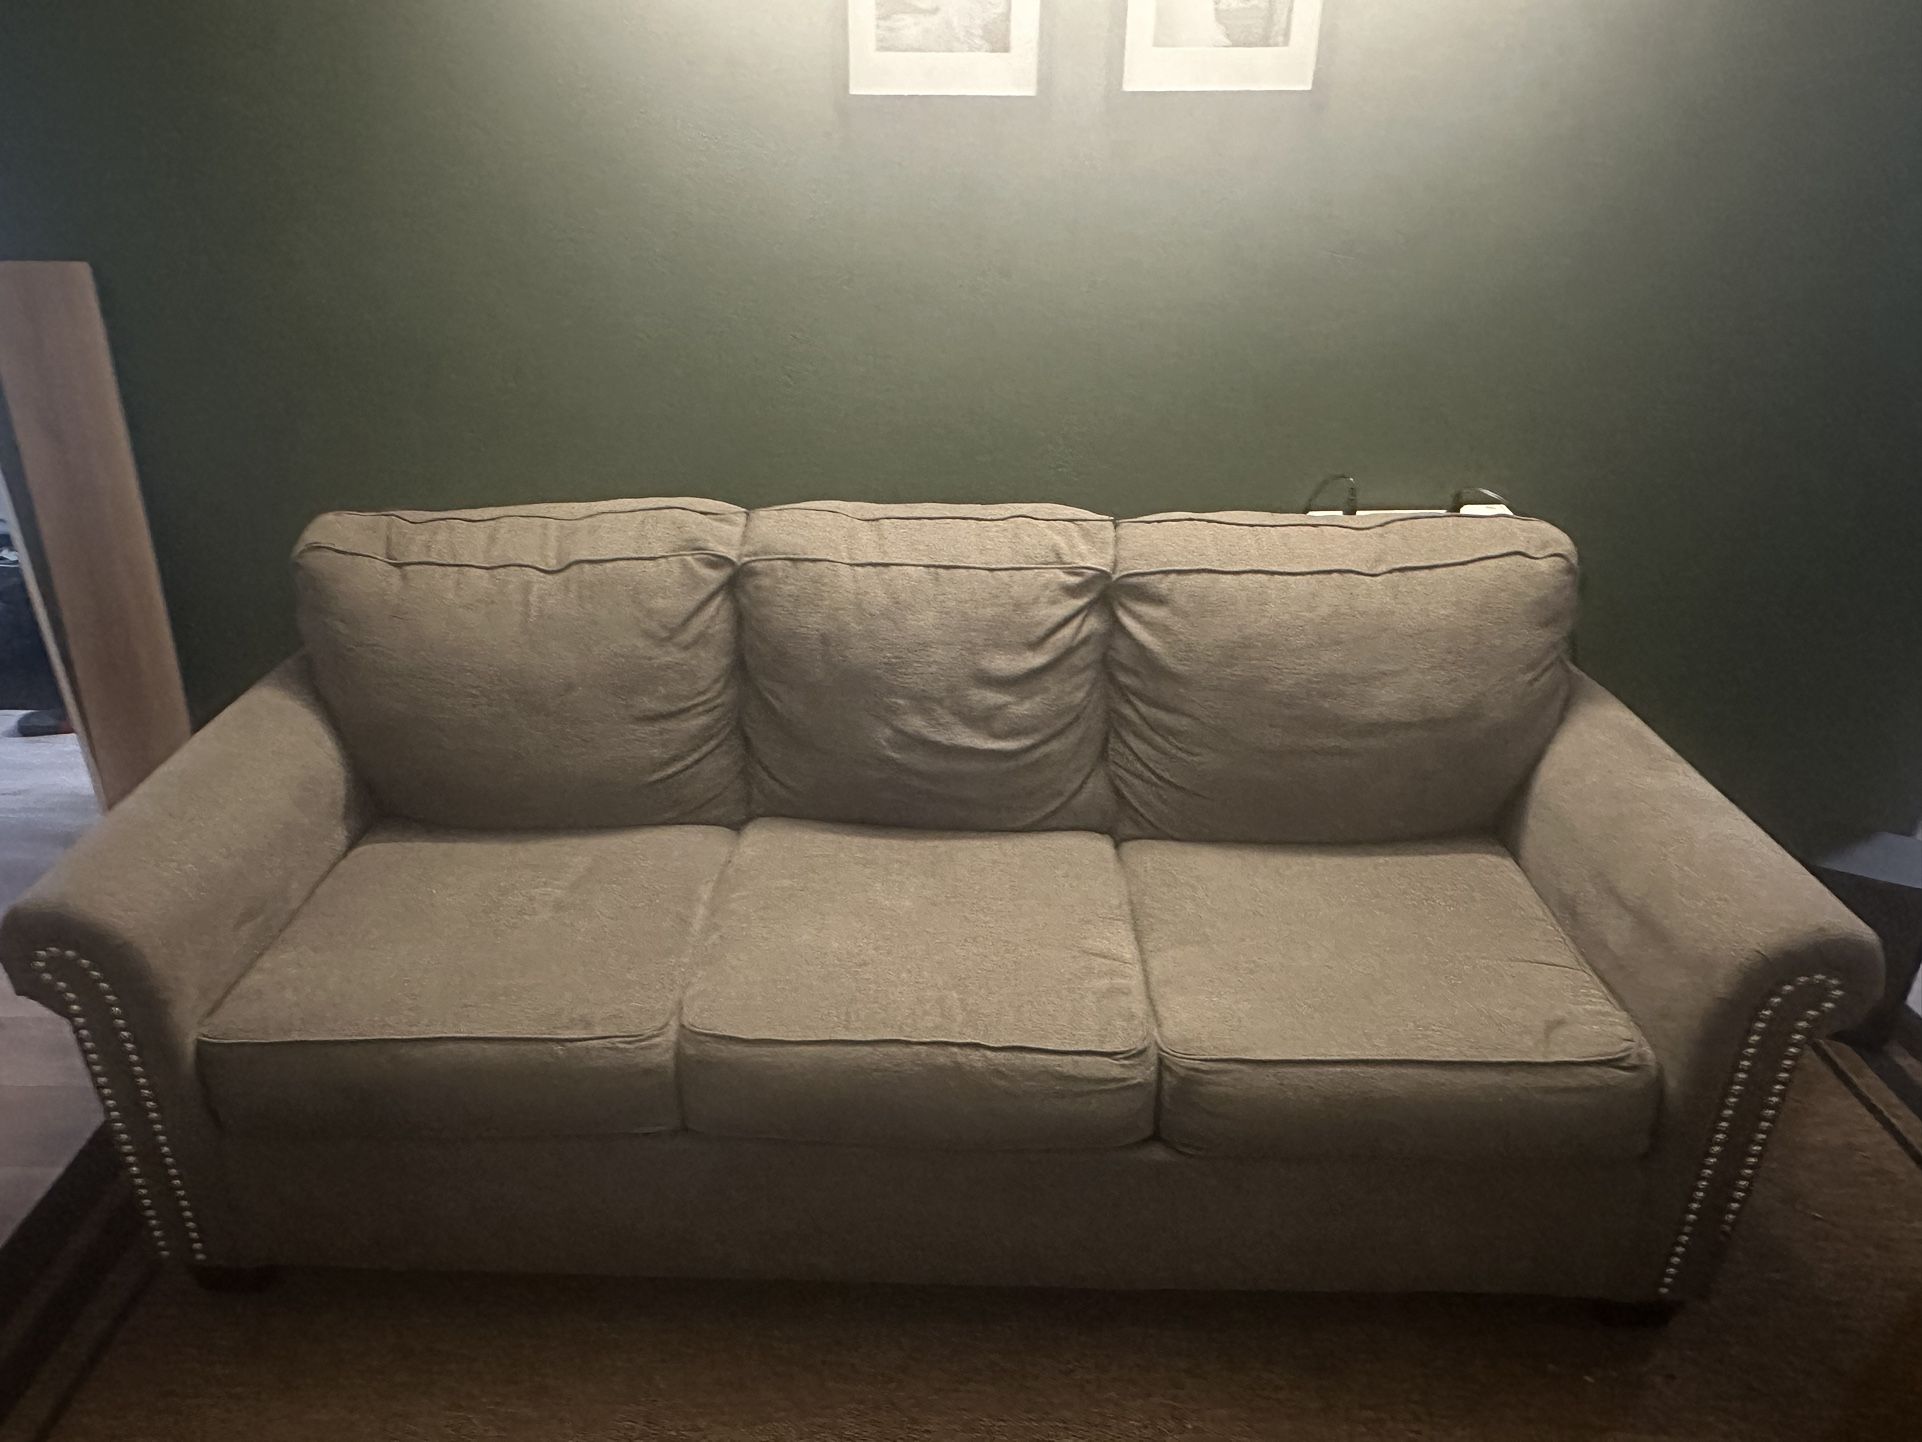 3 Grey Couches